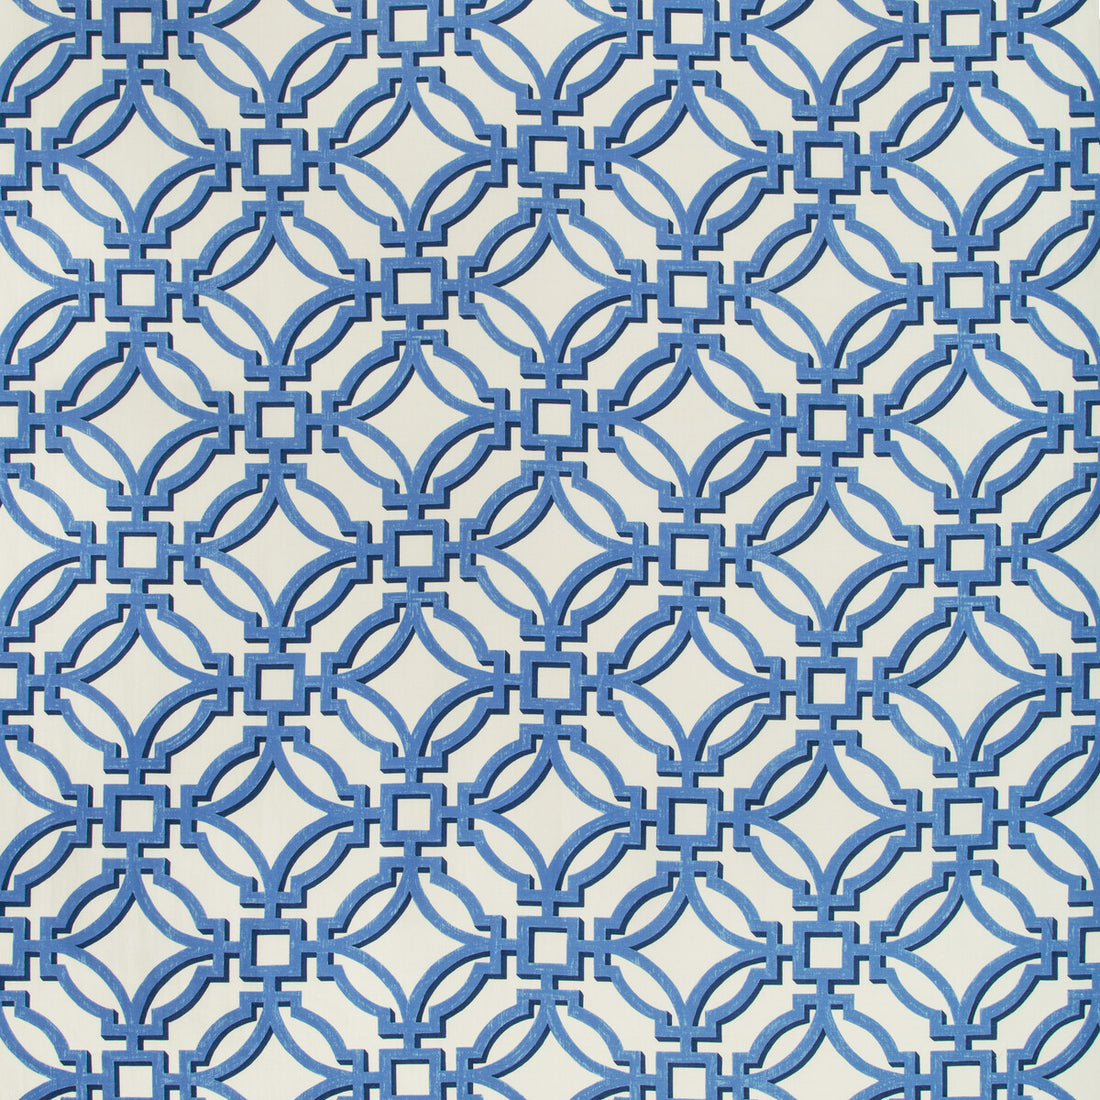 Salvy Print fabric in porcelain color - pattern 8019136.55.0 - by Brunschwig &amp; Fils in the Summer Palace collection